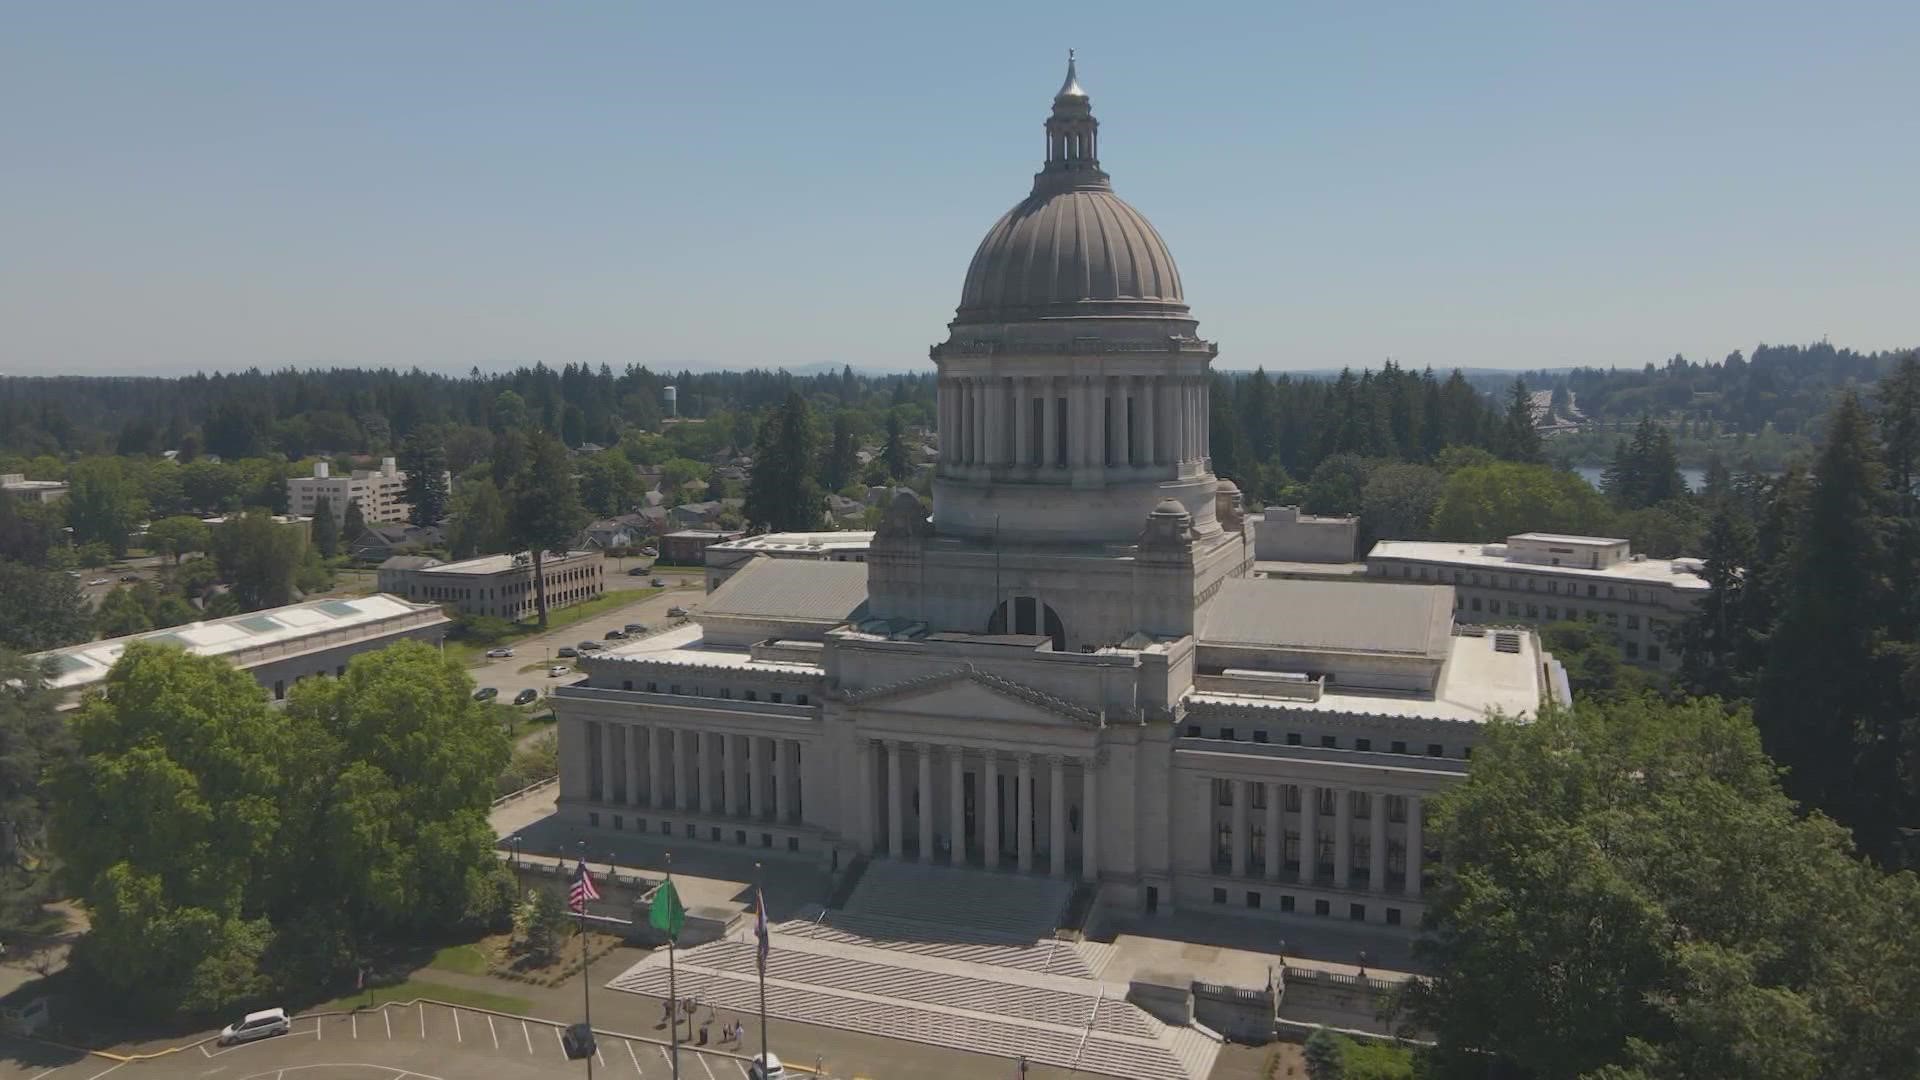 A state senator is introducing a proposal to change Washington state's constitution to strengthen reproductive rights and protections.